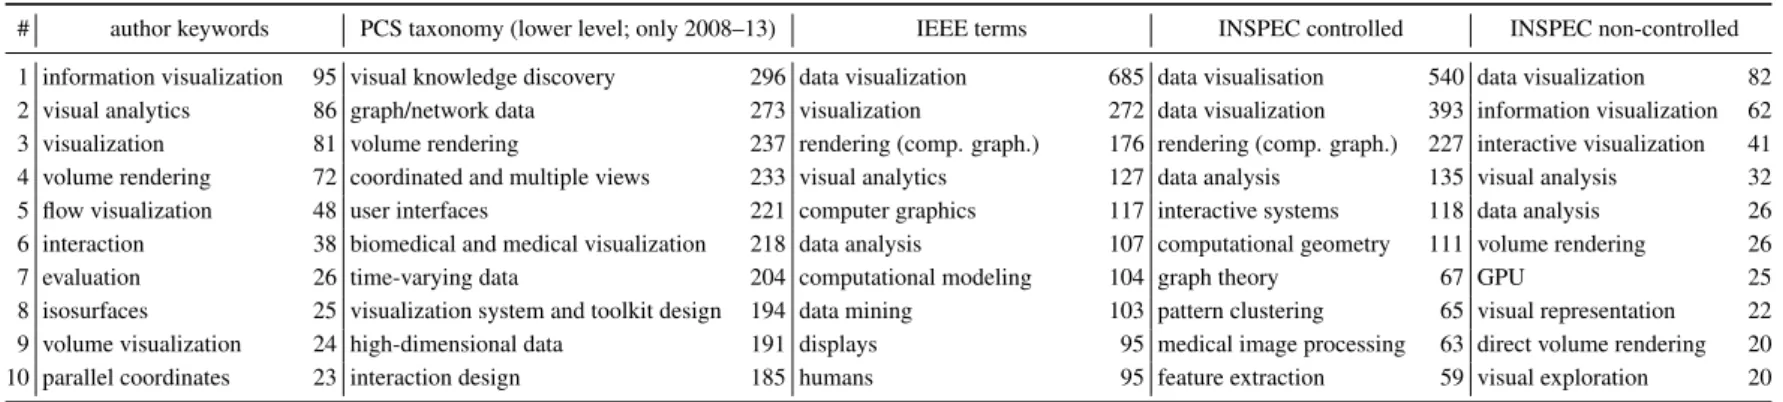 Table 2: Top ten keywords only of IEEE InfoVis, IEEE Vis/SciVis, and IEEE VAST for the different classification schemes; 2004–2013.